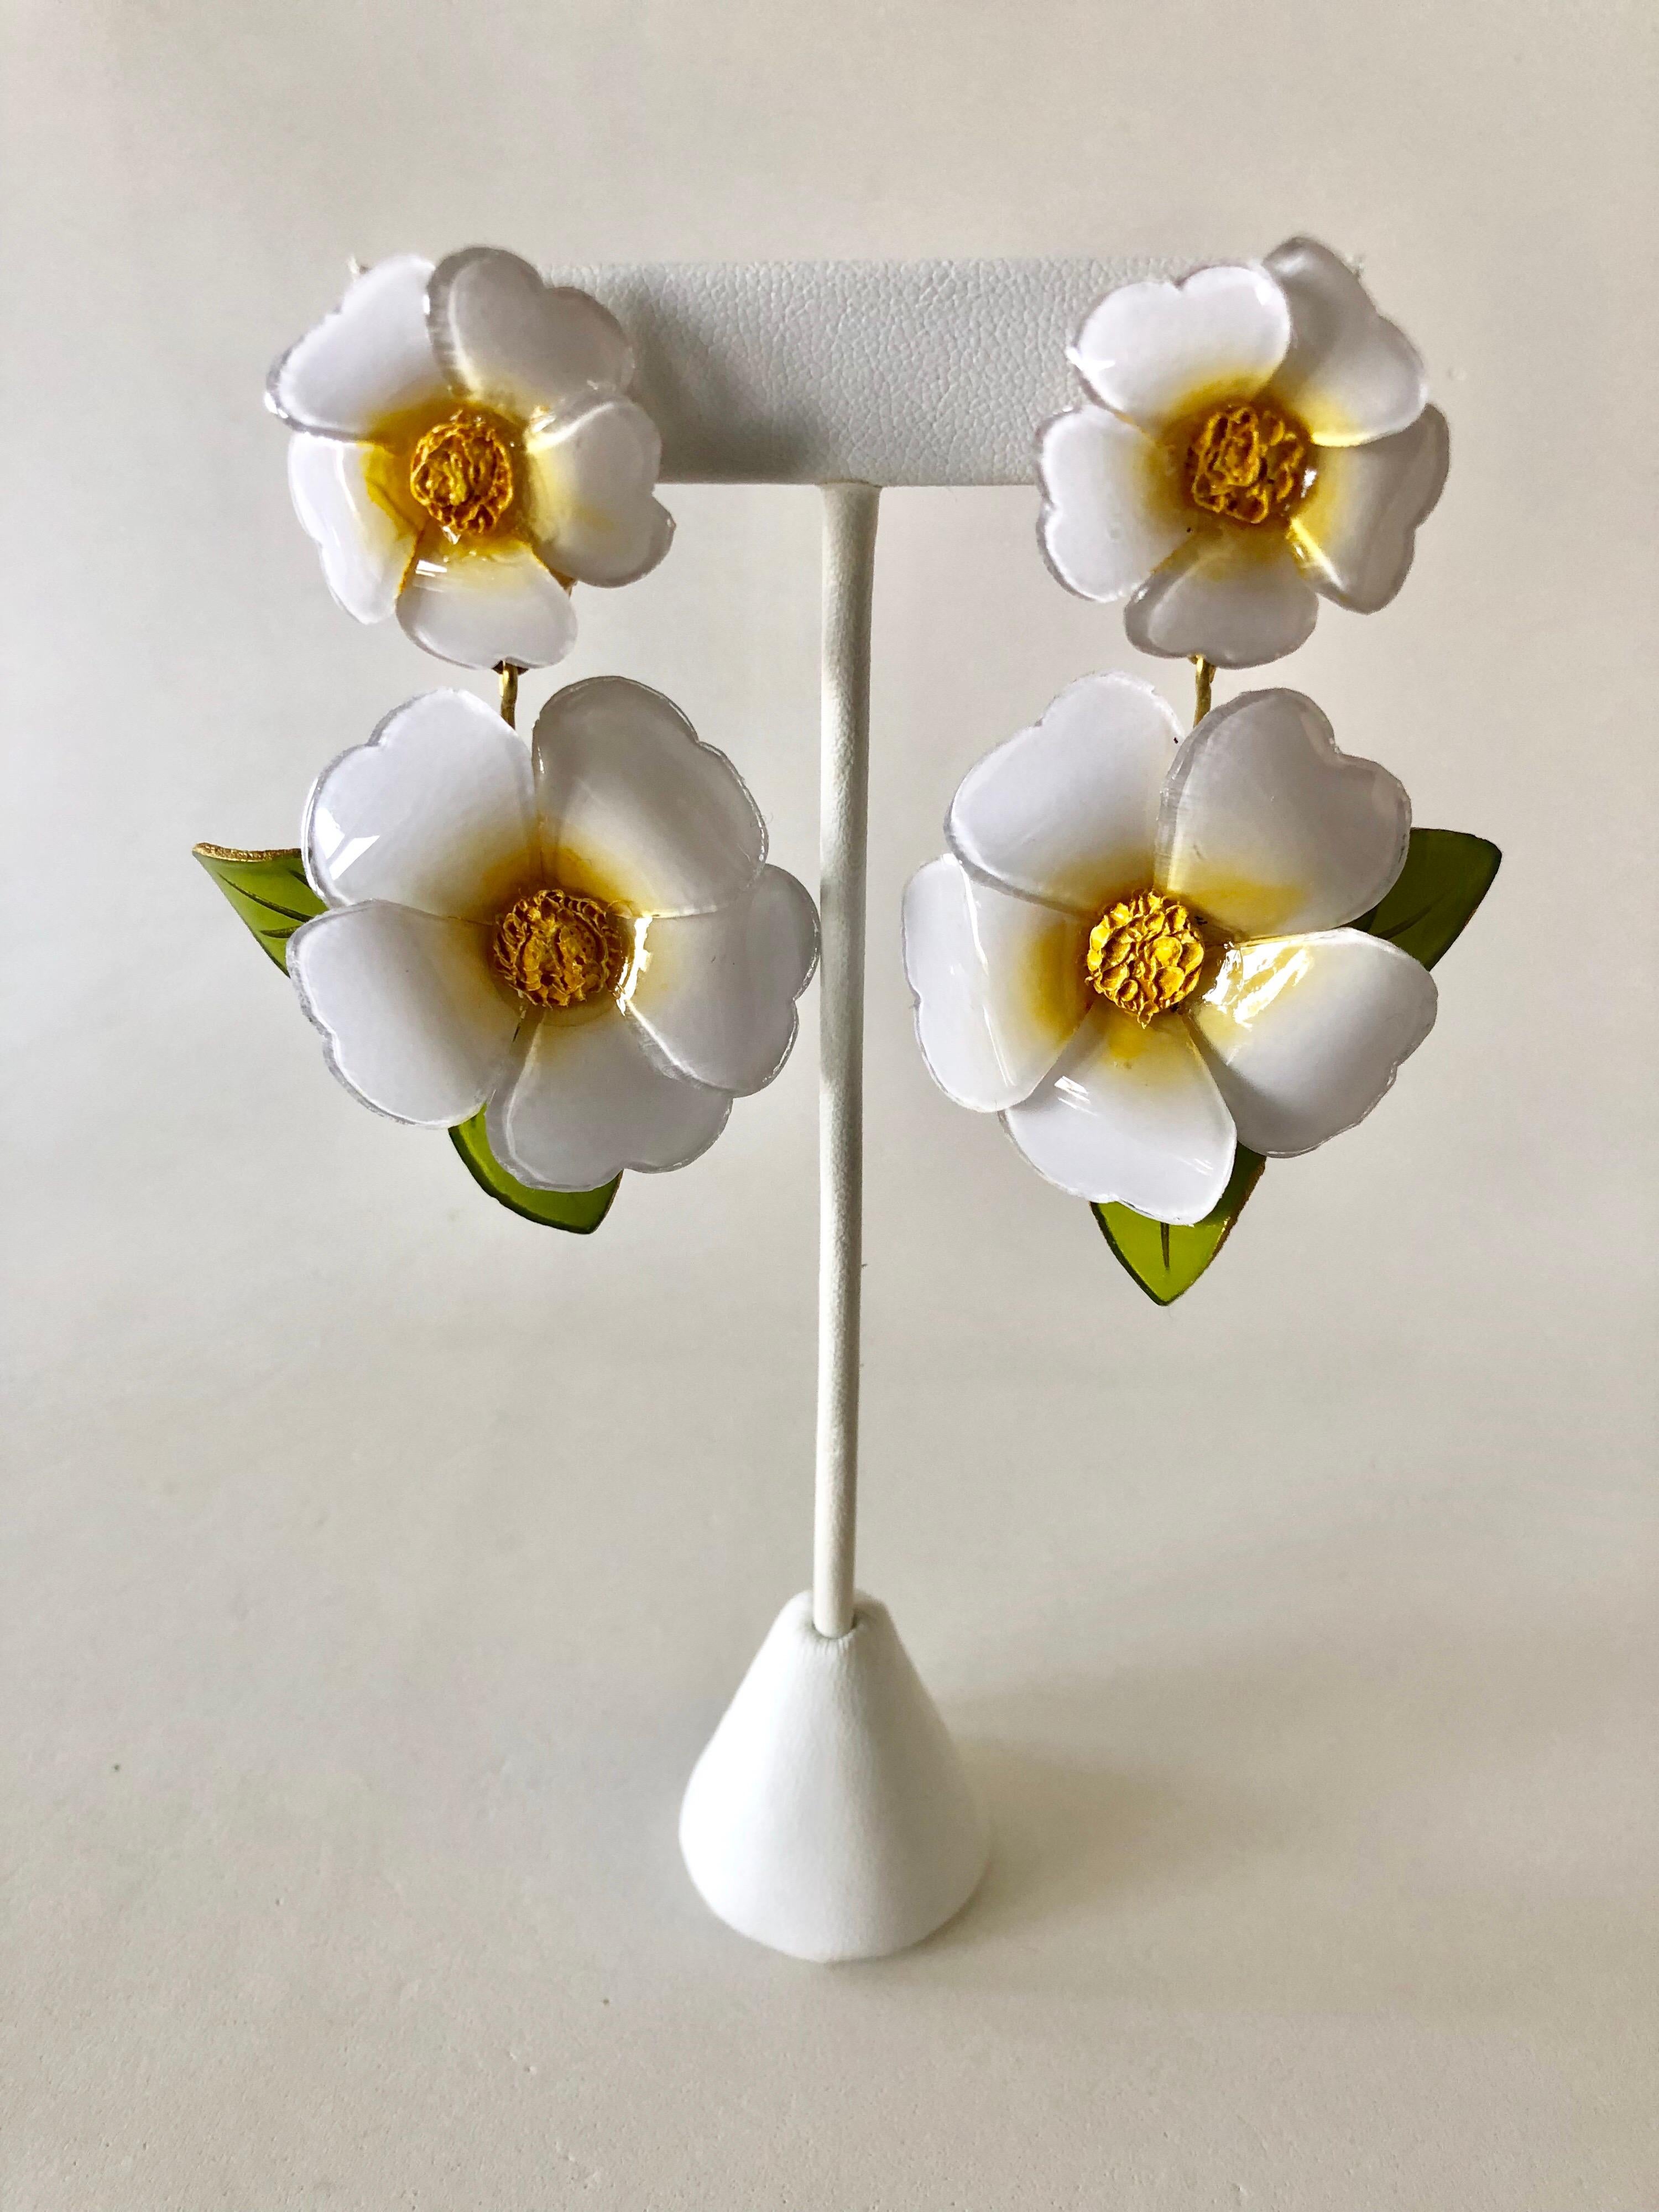 Light and easy to wear, these contemporary handmade artisanal clip-on statement earrings were made in Paris by Cilea. The lightweight earrings feature two large a enameline (enamel and resin composite) white daisy flowers. The flowers are oversized